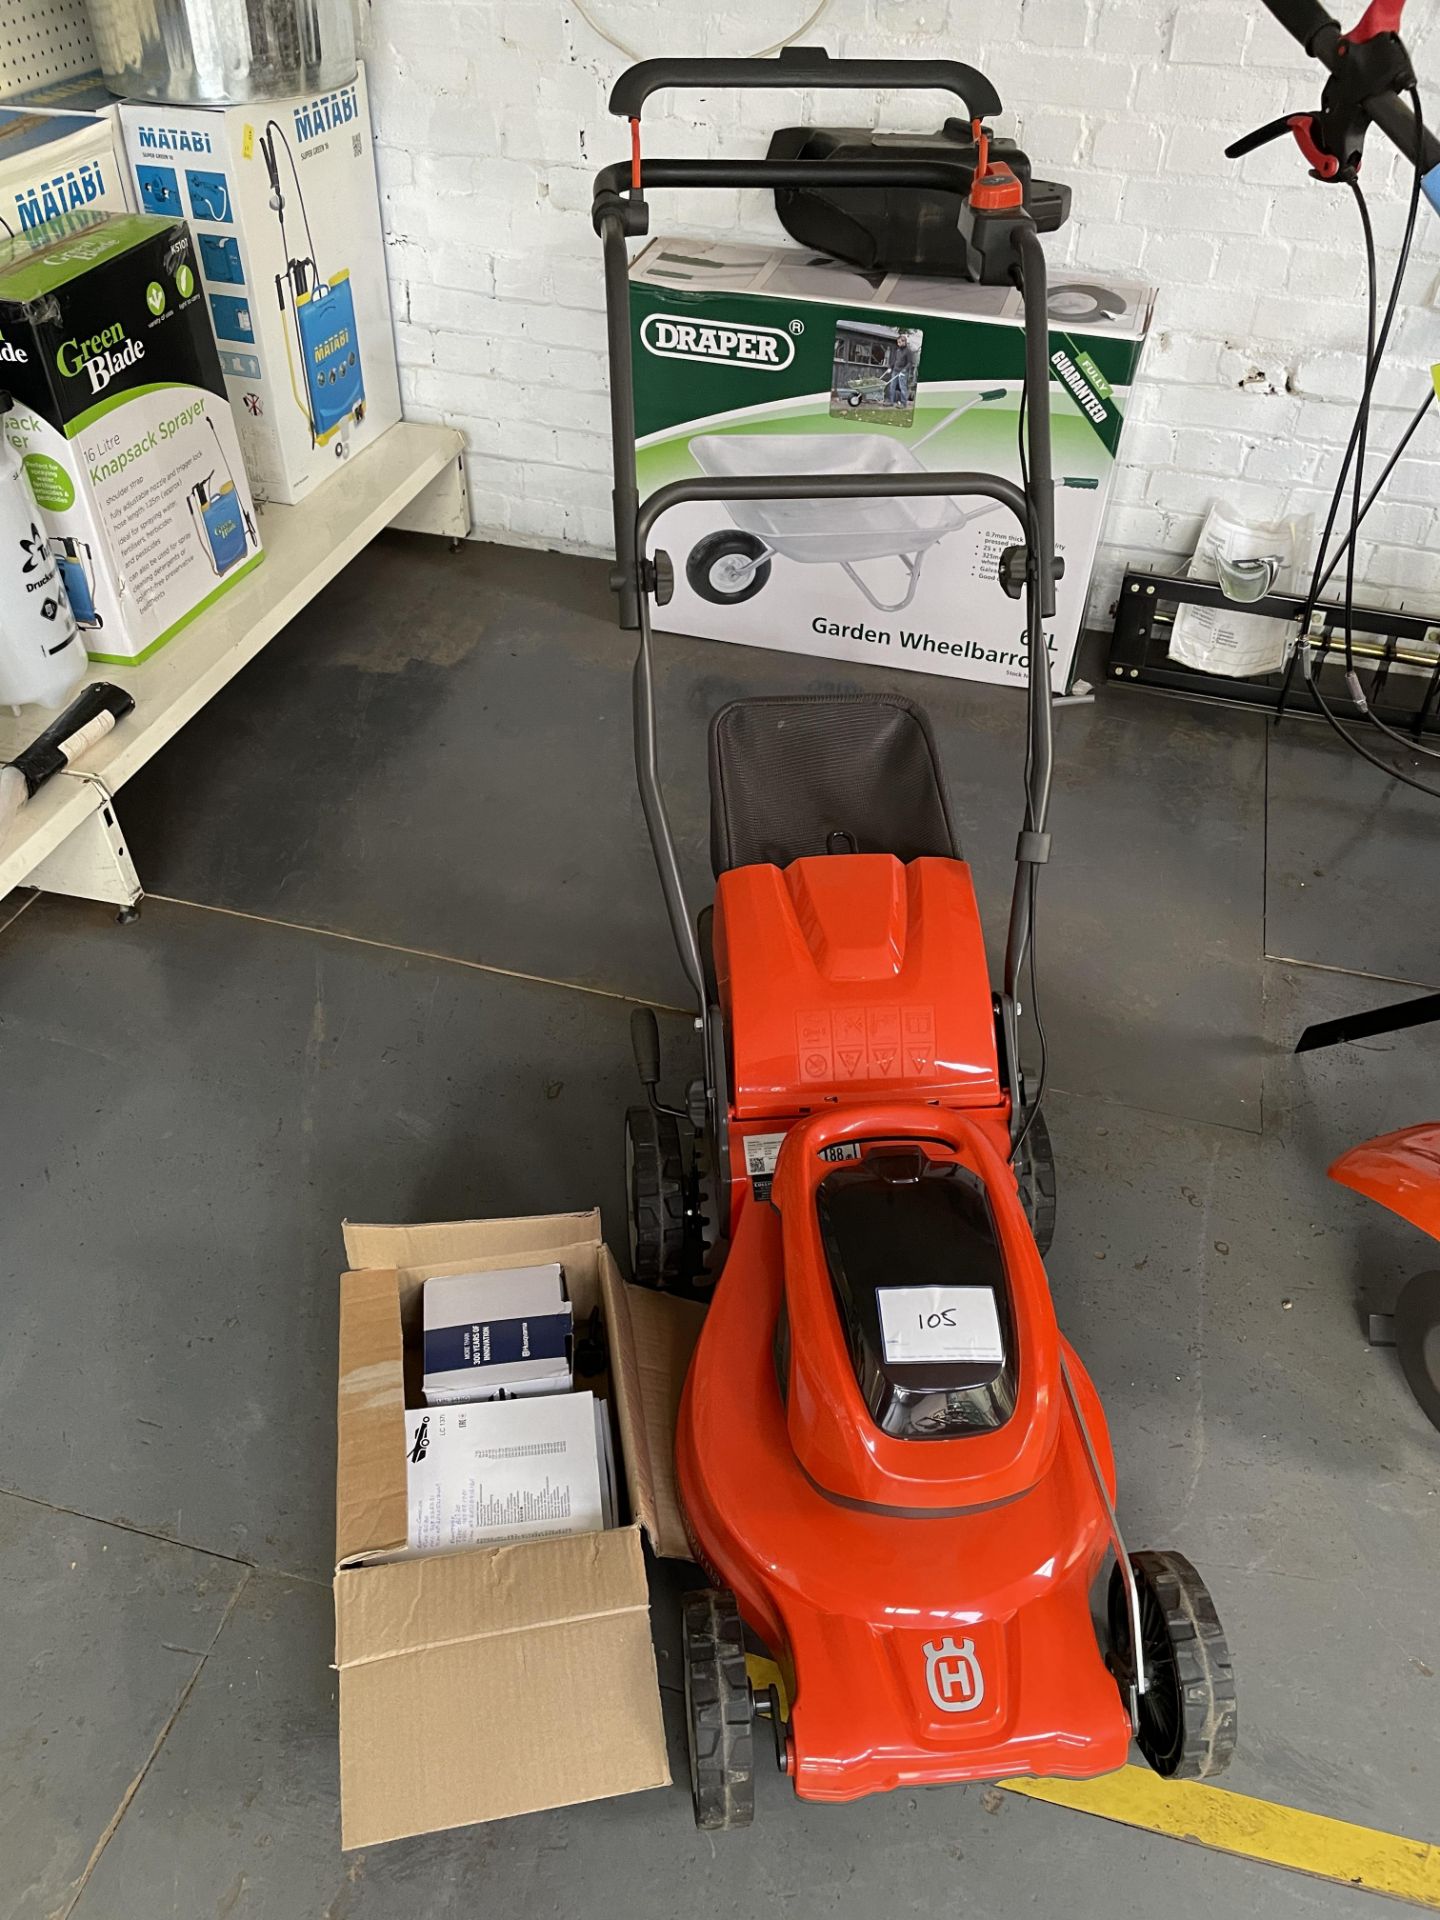 1: Husqvarna Battery Powered Lawn Mower, Date of Manufacture 2021. Serial Number: 20211000066 Comple